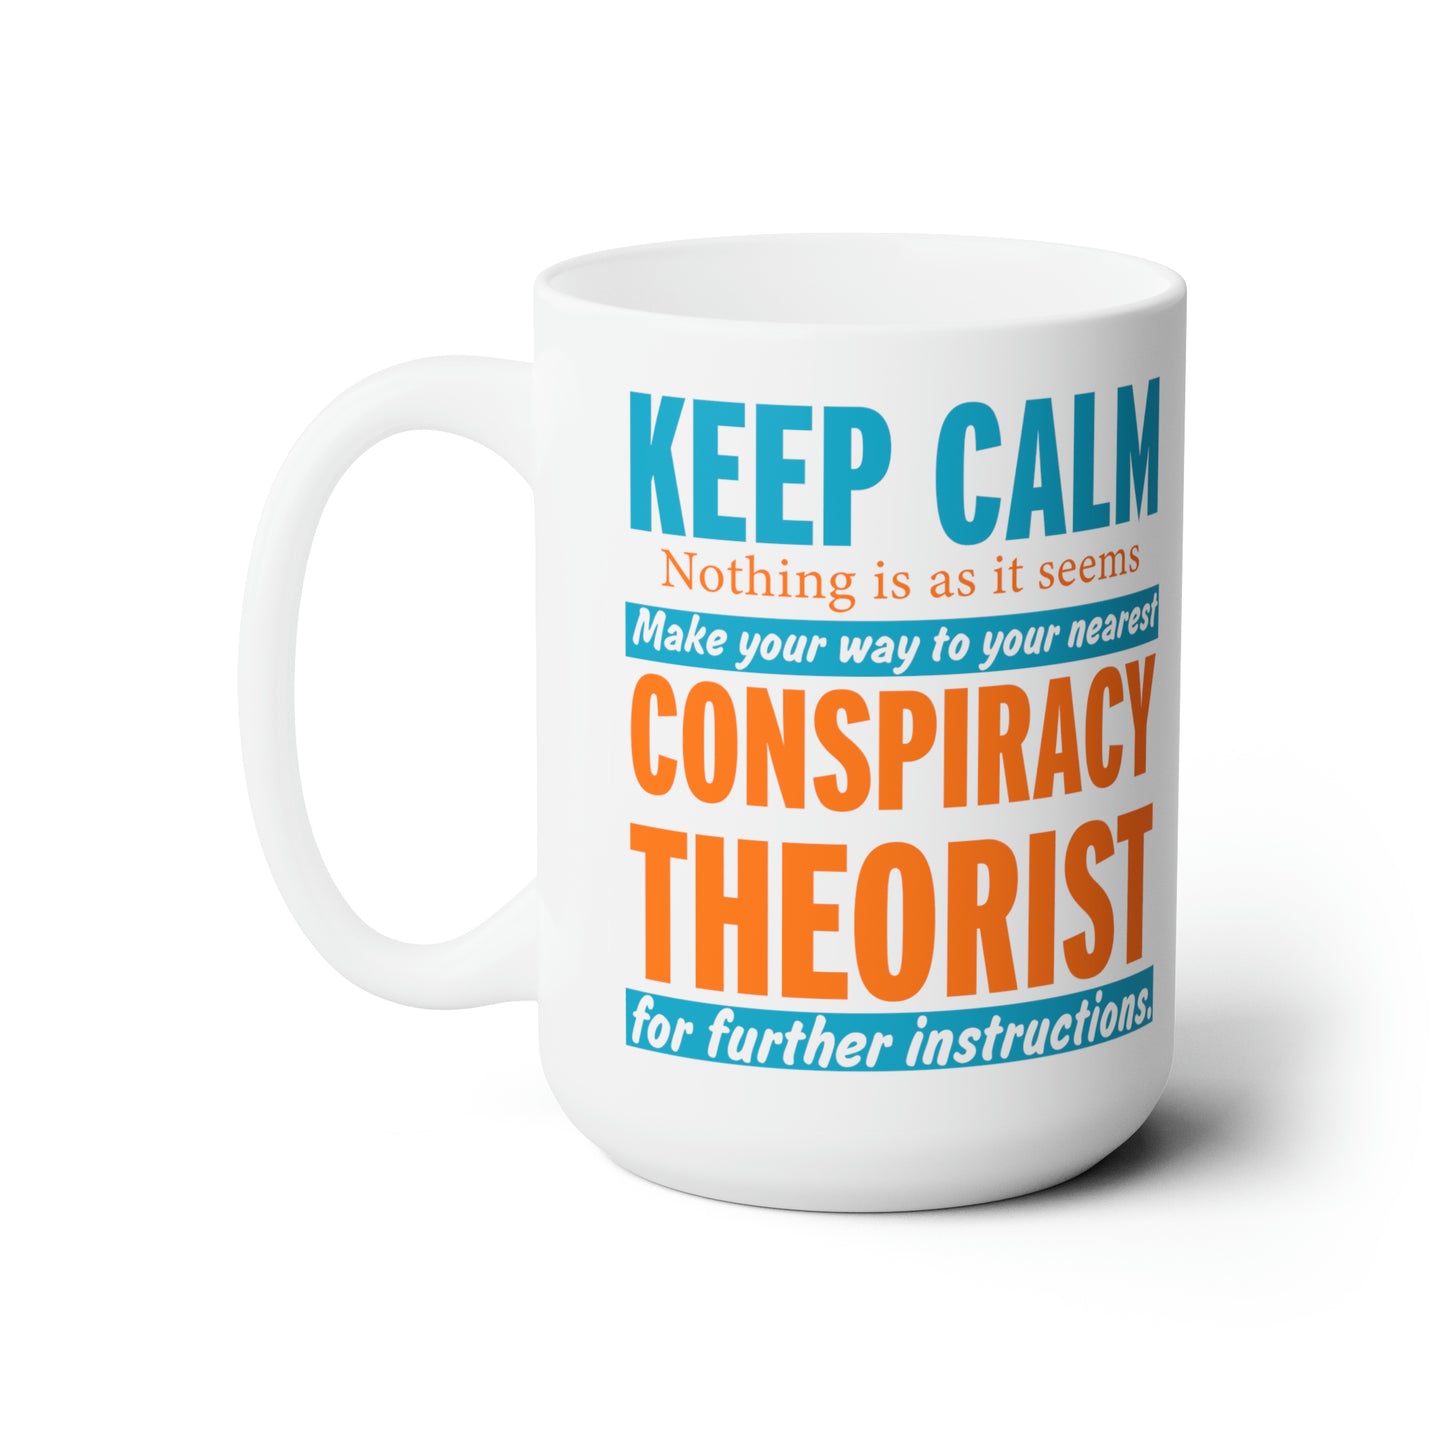 Keep Calm Mug For Conspiracy Theorist Hot Tea Cup For Conservative Gift